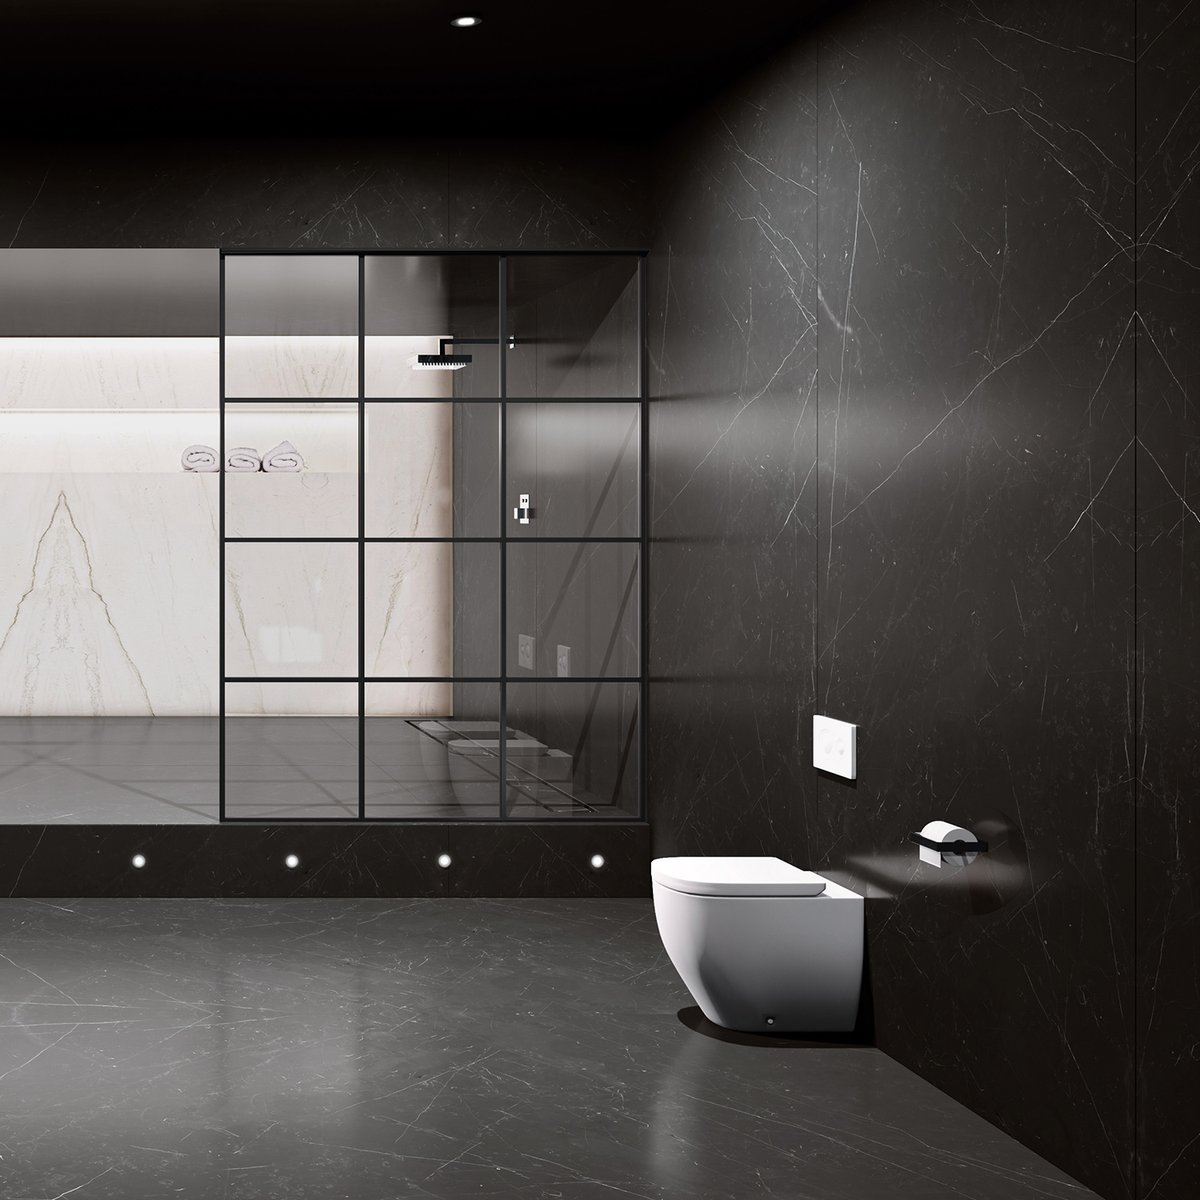 The large slab format surface of Inalco MDi creates a luxurious impression in bathrooms and shower rooms and can be cut to an exact size to fit the space, achieving a bespoke solution with minimal grout lines and a seamless finish. Pictured: Storm Negro flooring and wall cladding